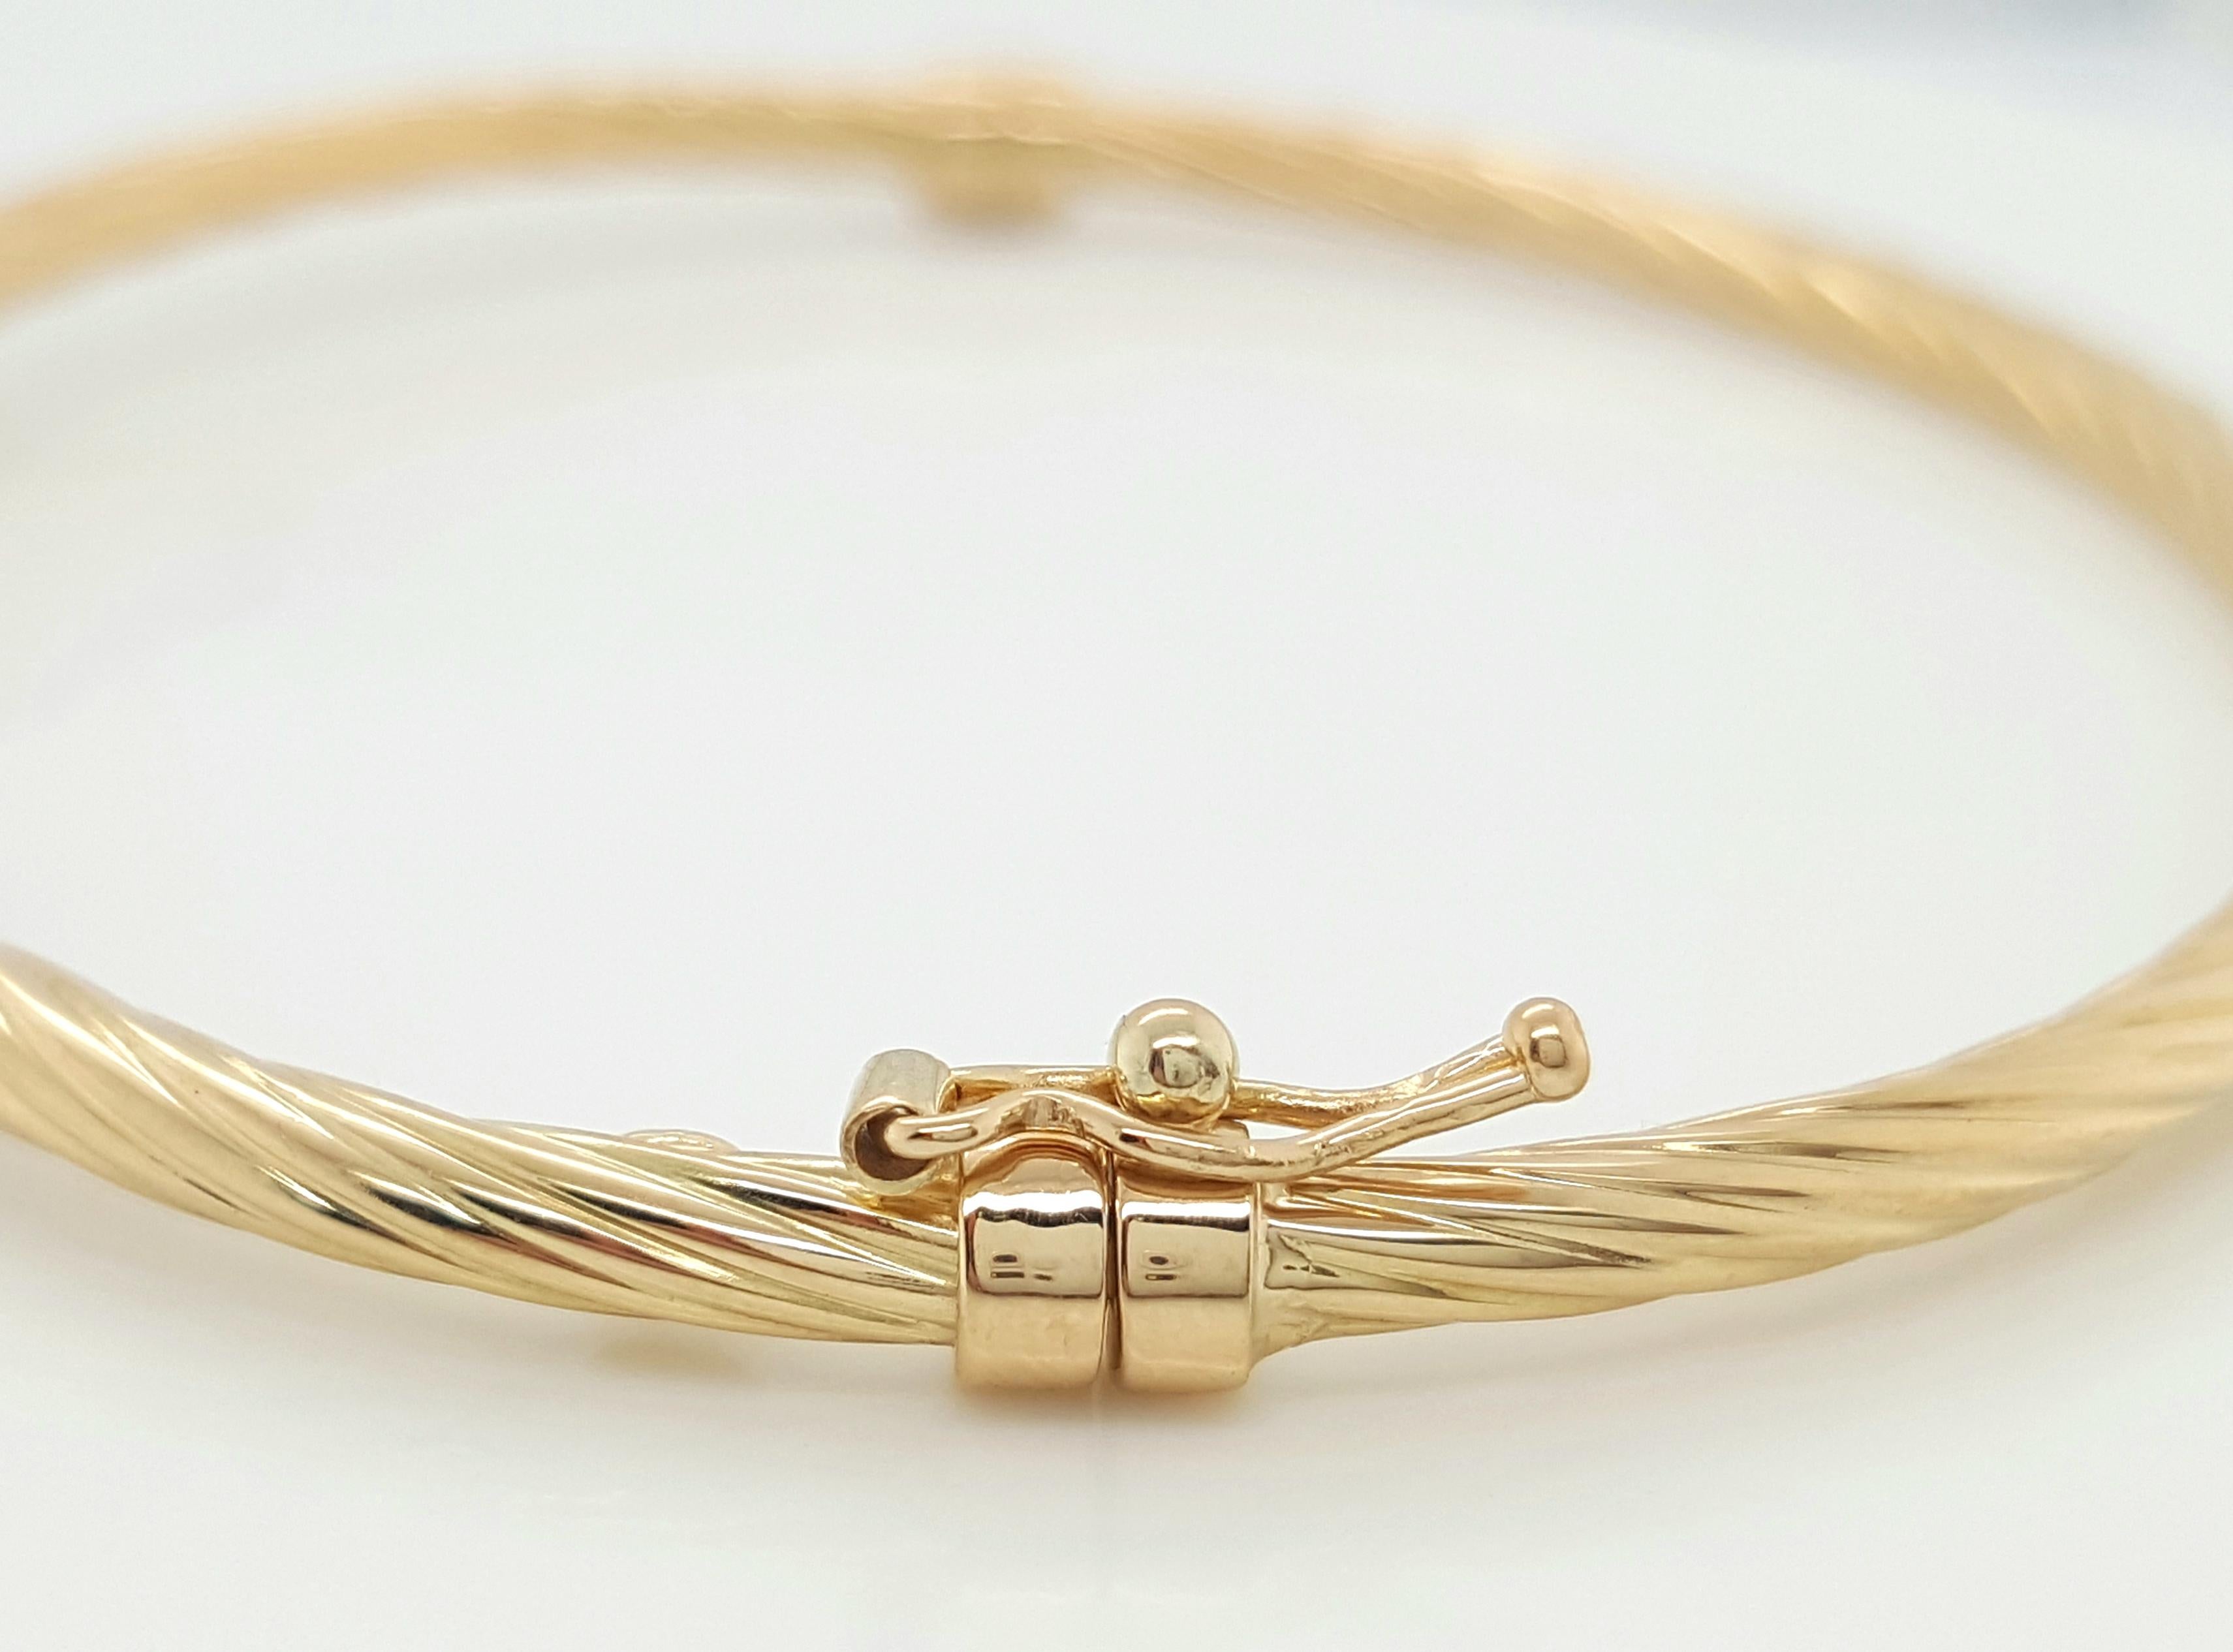 This bracelet is sure you make feel like a golden goddess. It’s made perfectly to lay flat on the wrist. It is 18 karat yellow gold weighing 4.1 grams. It is 2.9 mm wide. The closure is tongue and grove with a safety latch on one side for extra